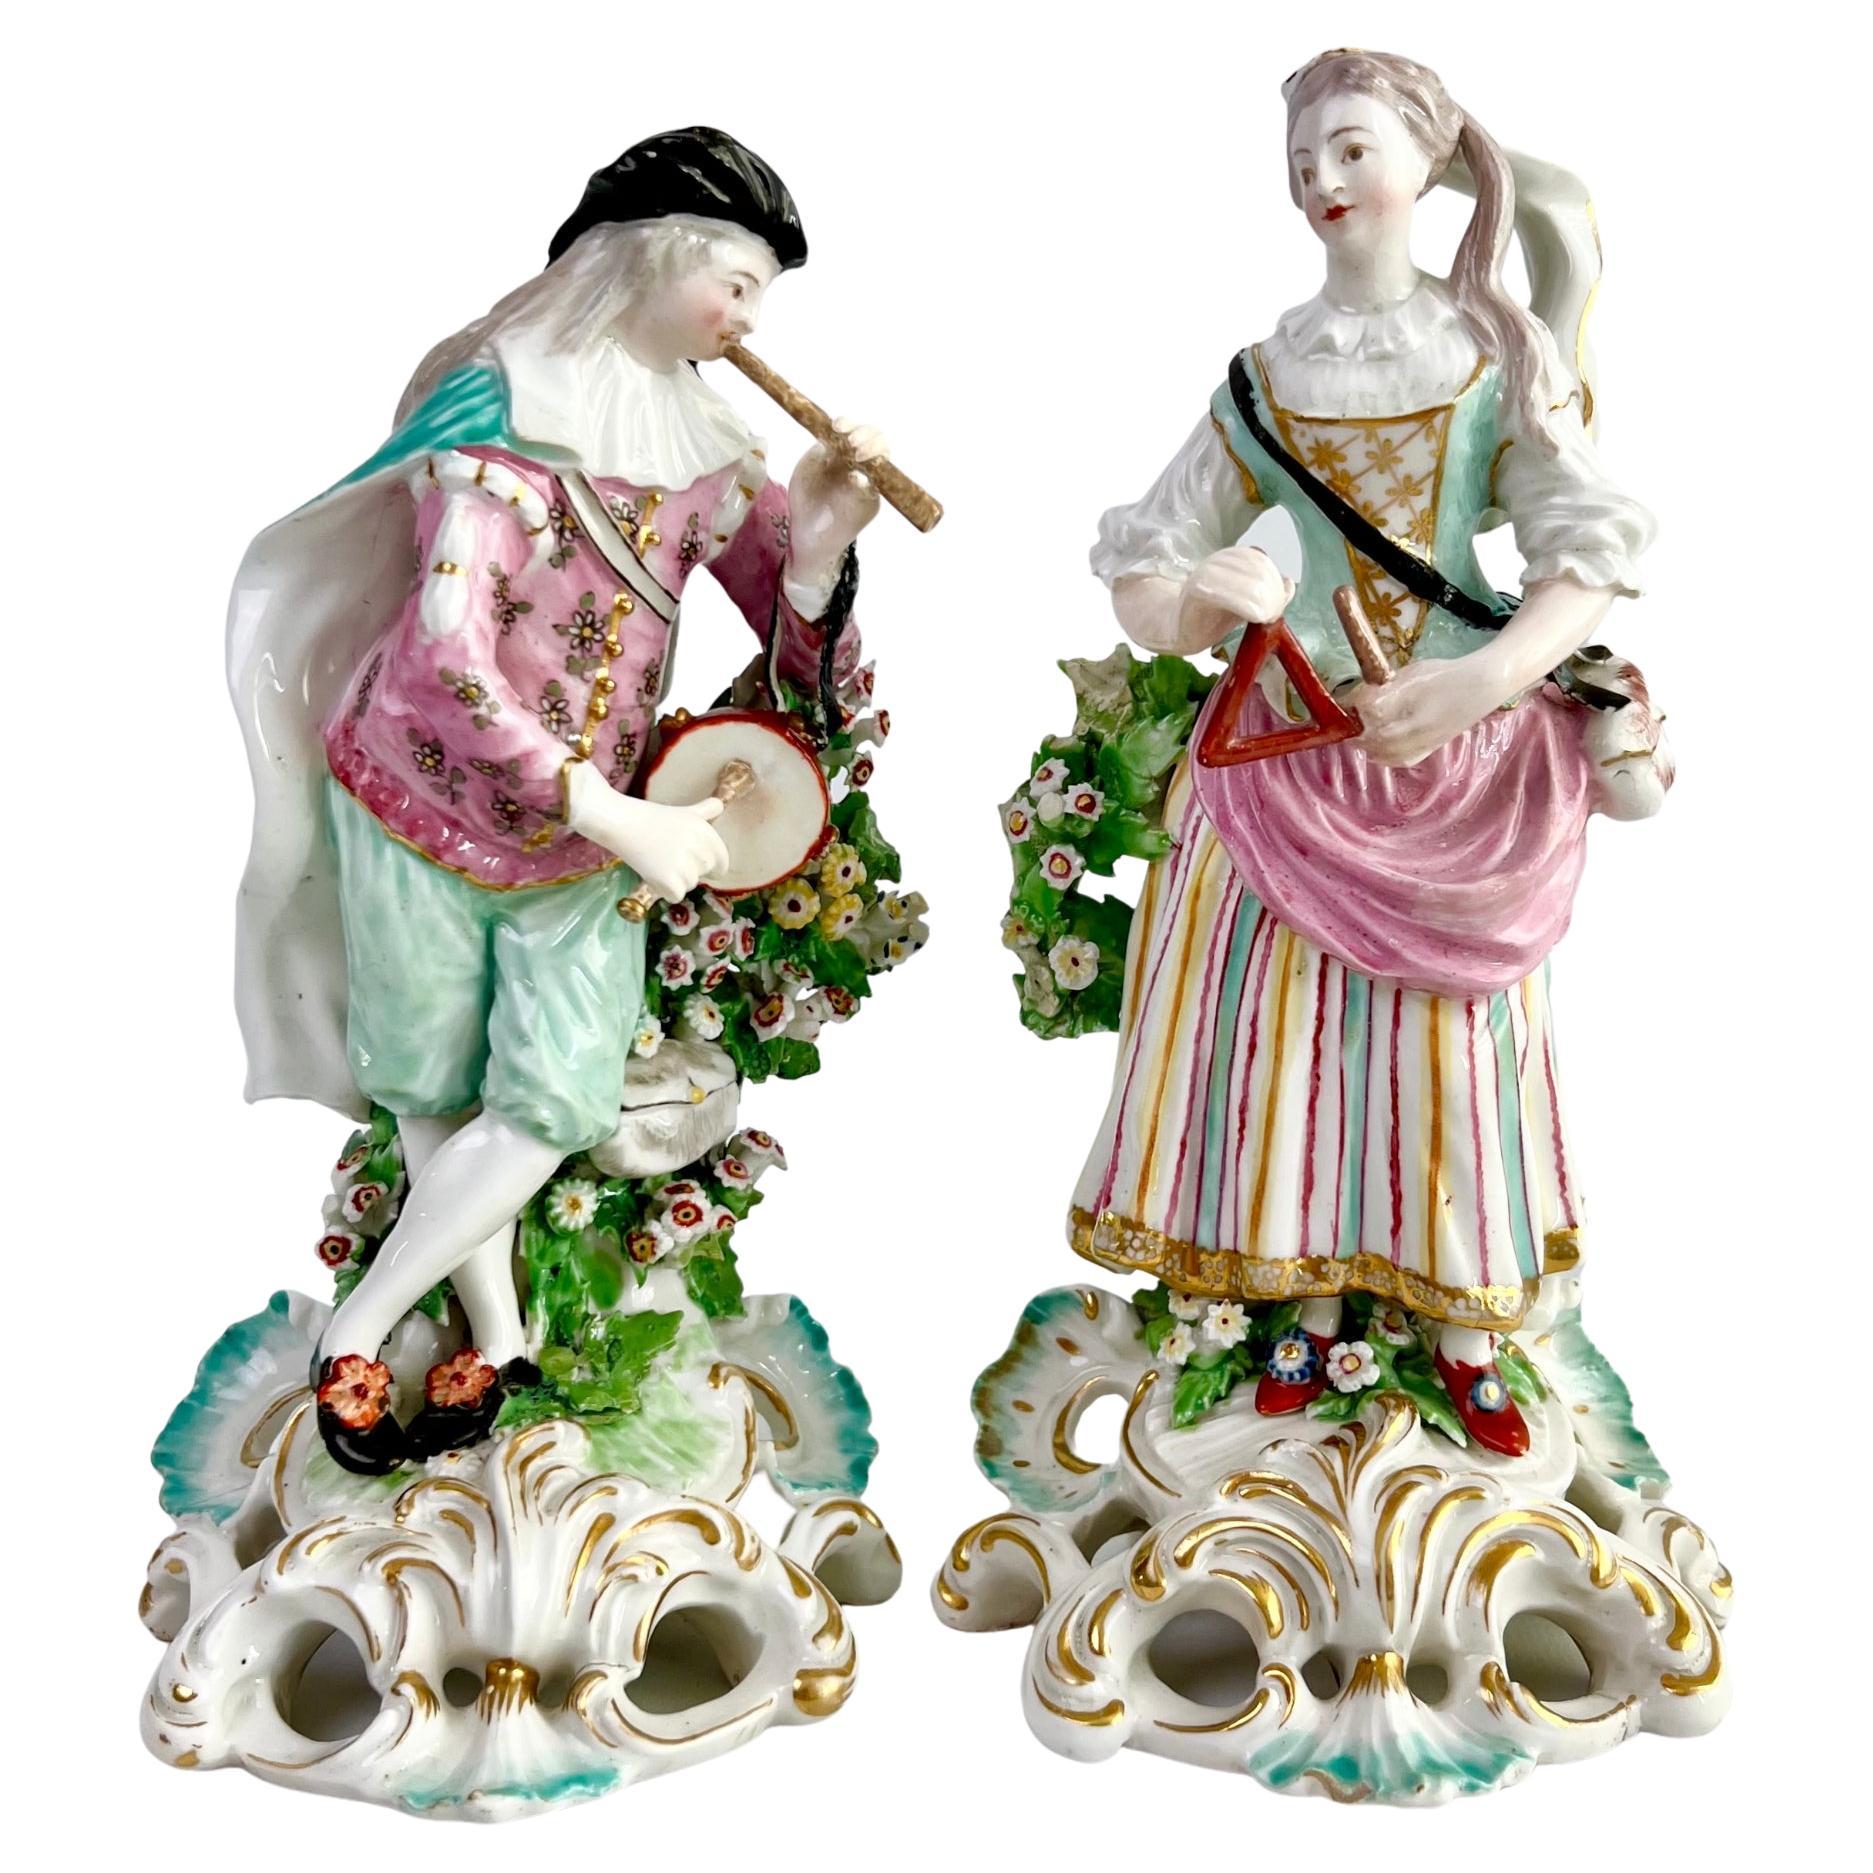 Derby Pair of Porcelain Figures, "Idyllic Musicians", Rococo ca 1765